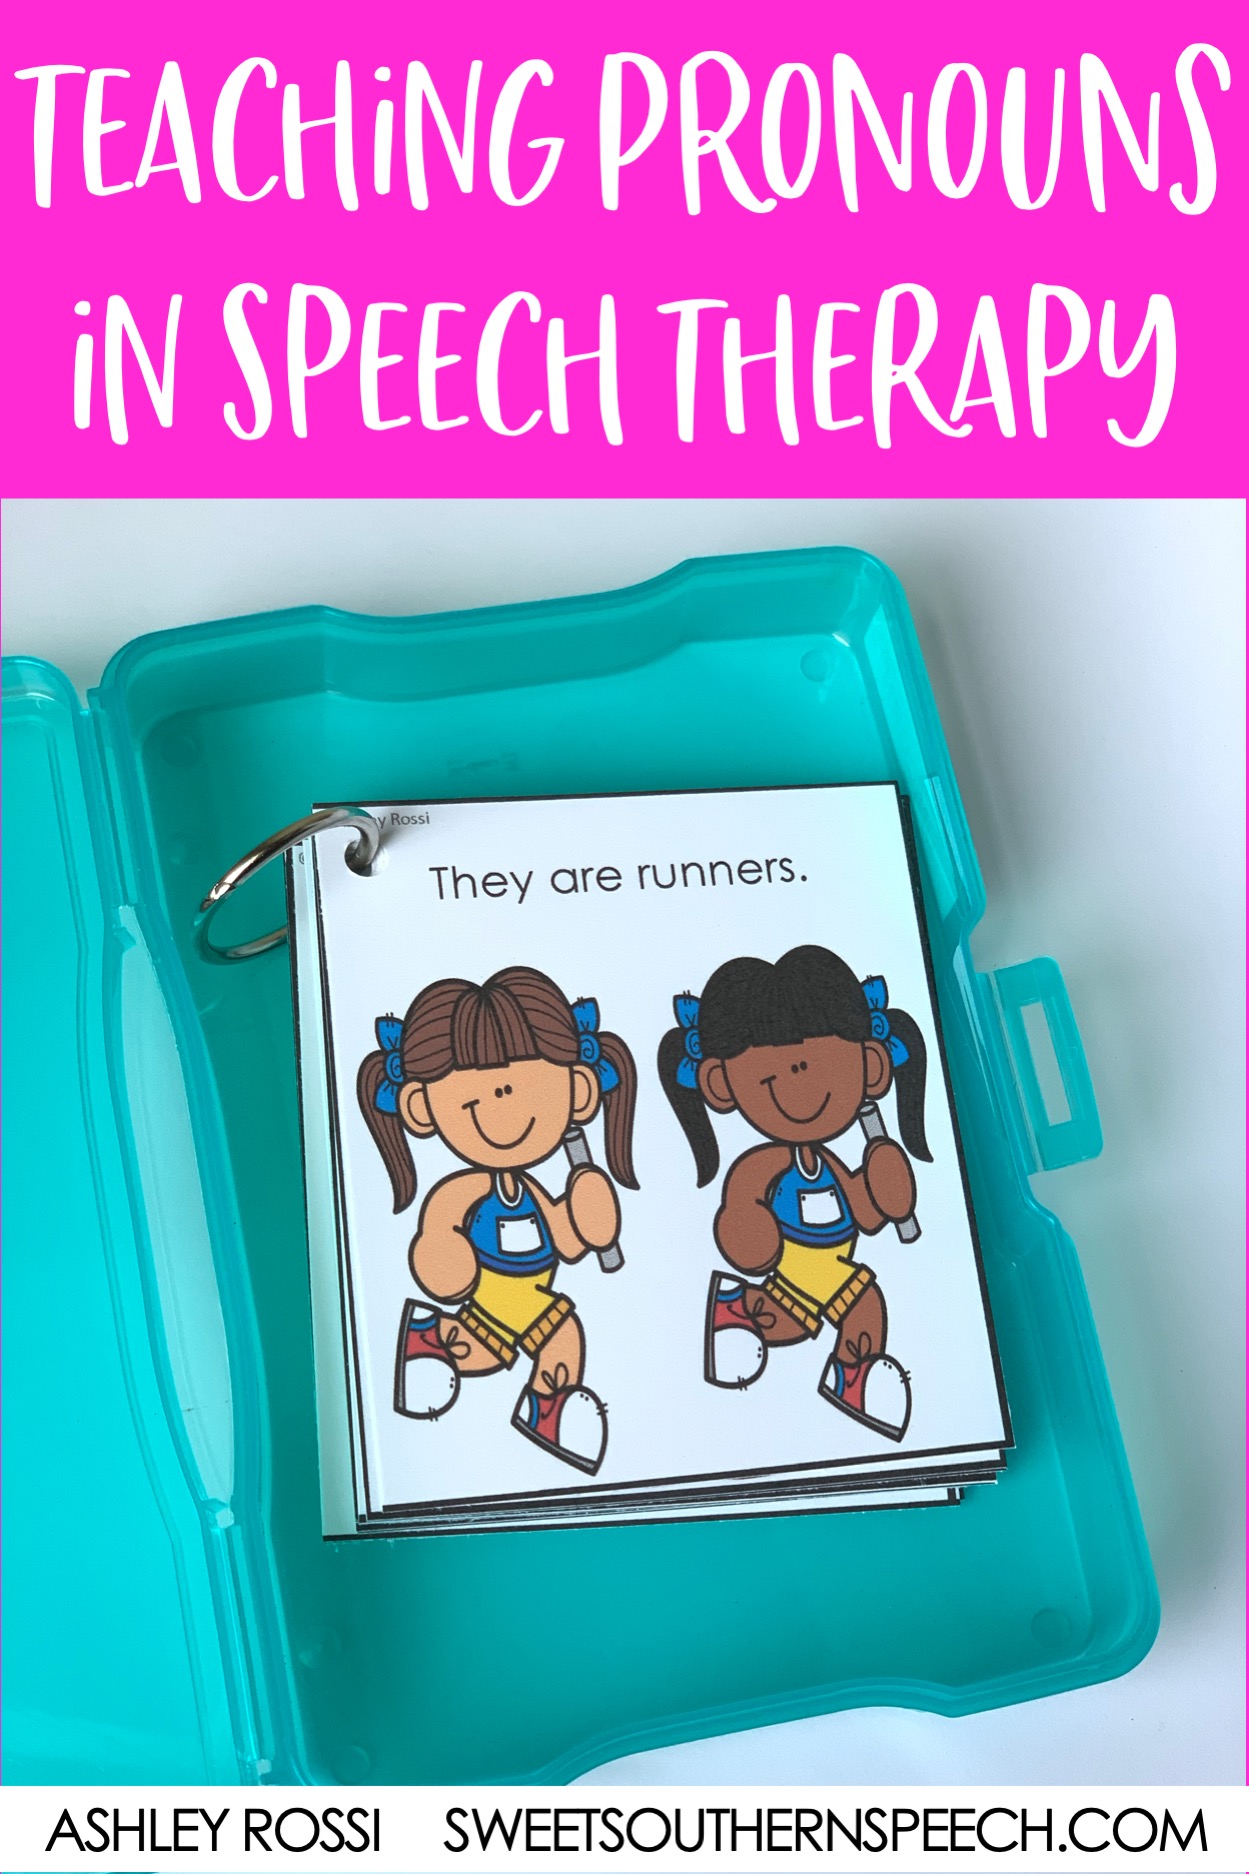 An evidence-based approach to working on pronouns in speech therapy